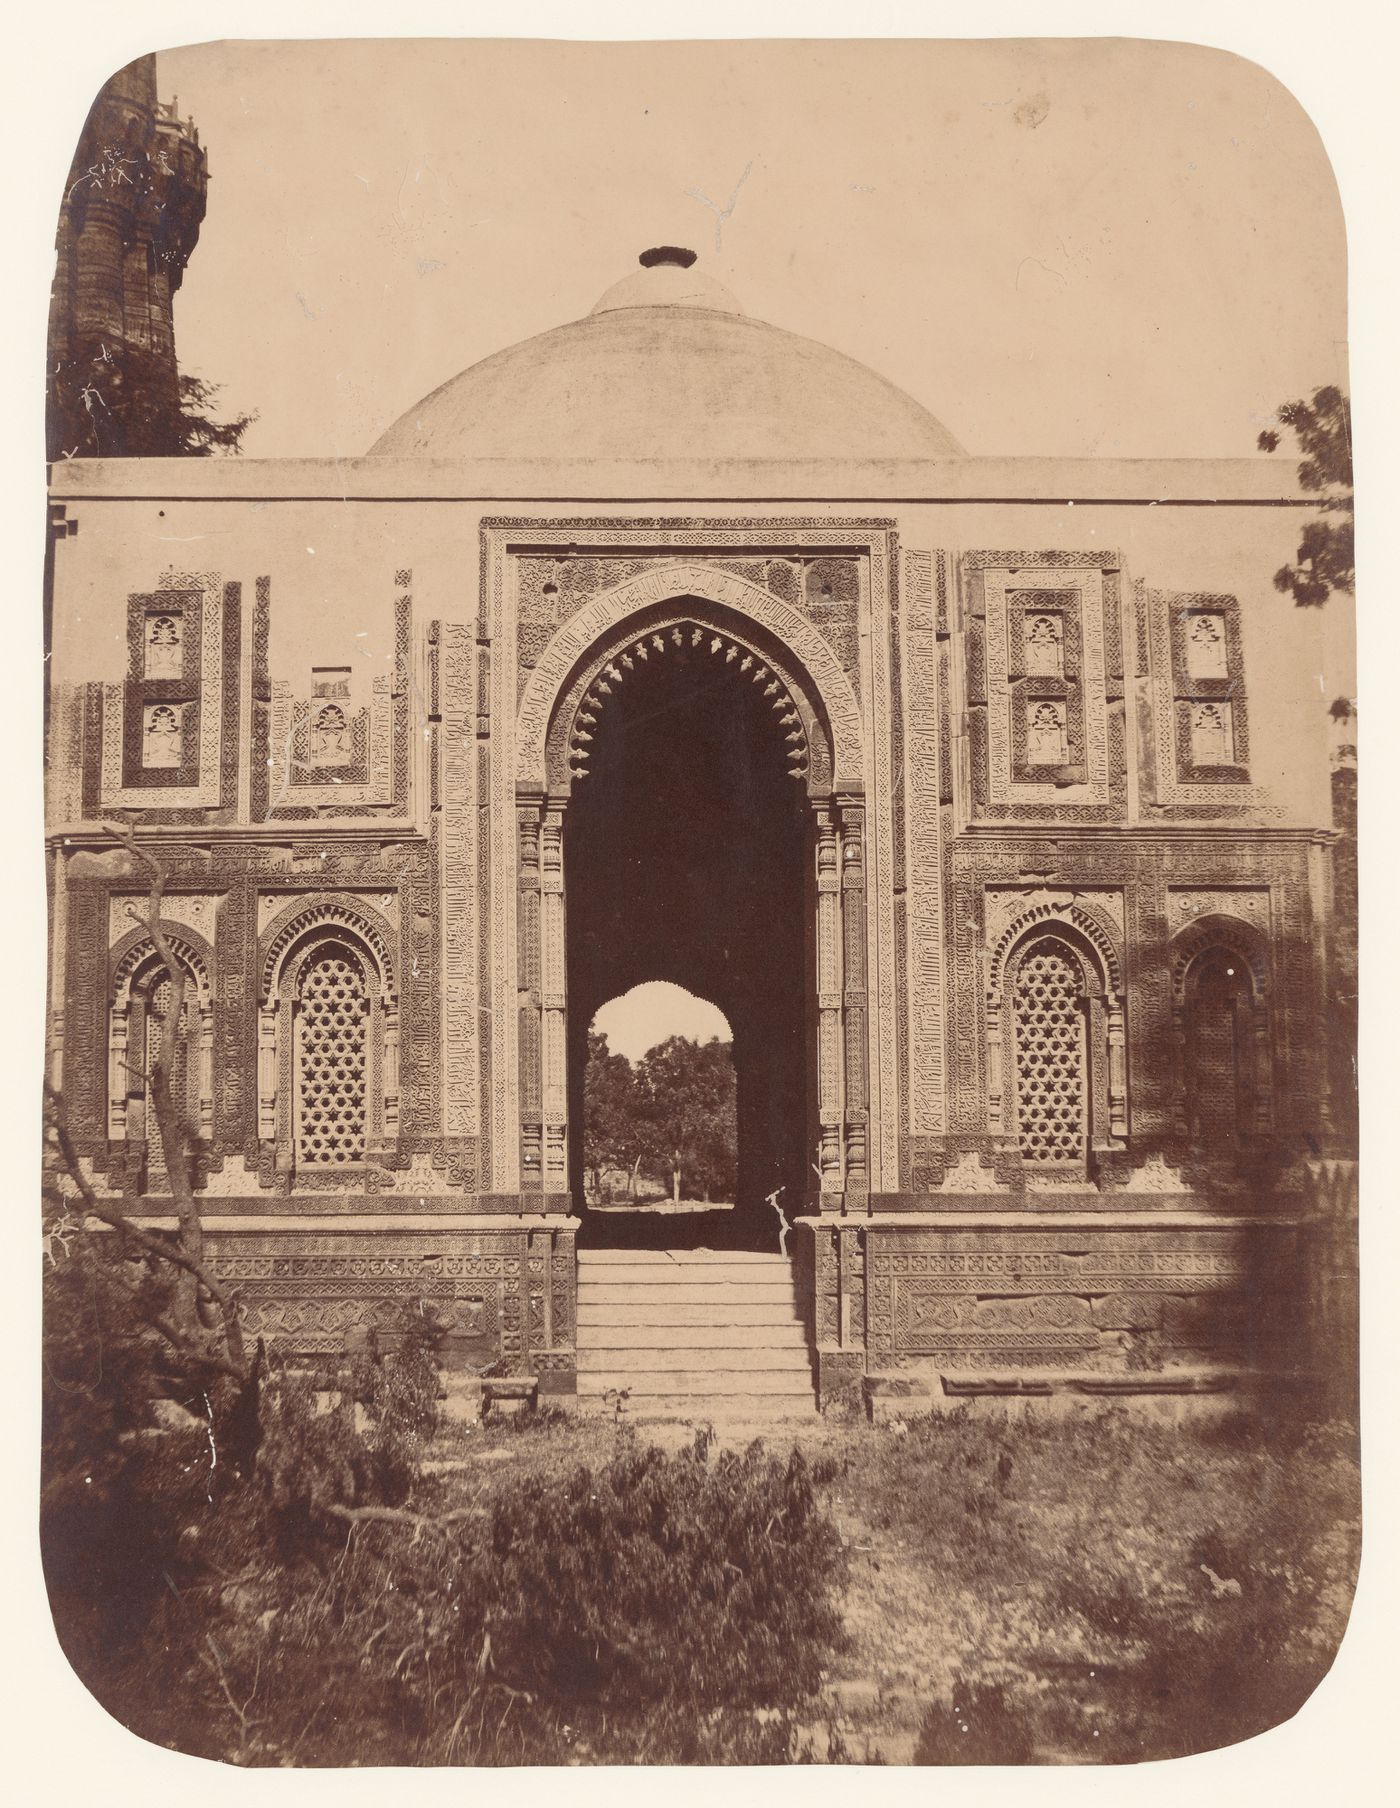 View of the 'Ala'i Darvaza [Lofty Gate] showing the Qutb Minar in the left background, Quwwat al-Islam [Might of Islam] Mosque Complex, Delhi, India